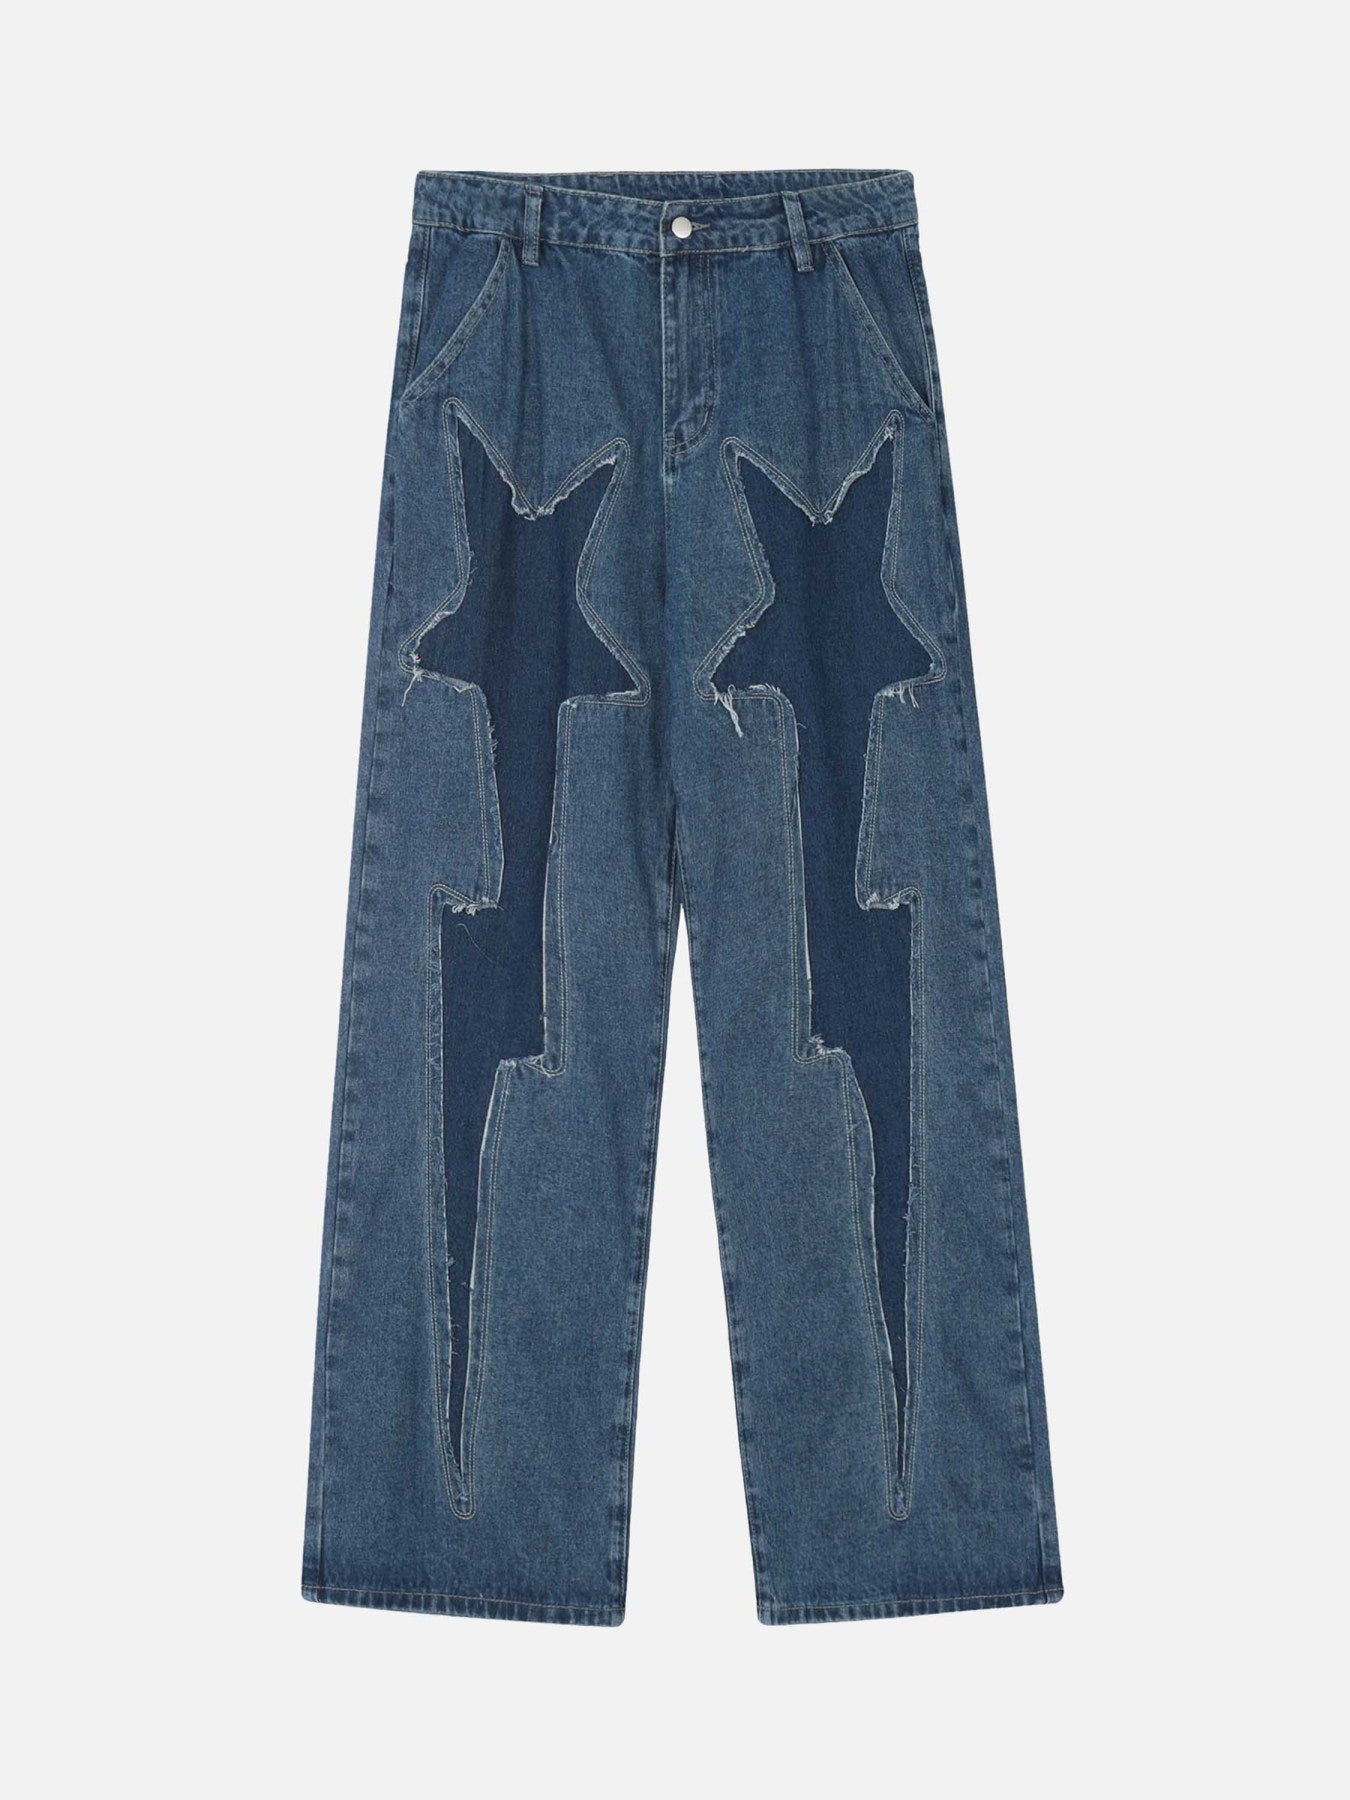 star embroidered jeans